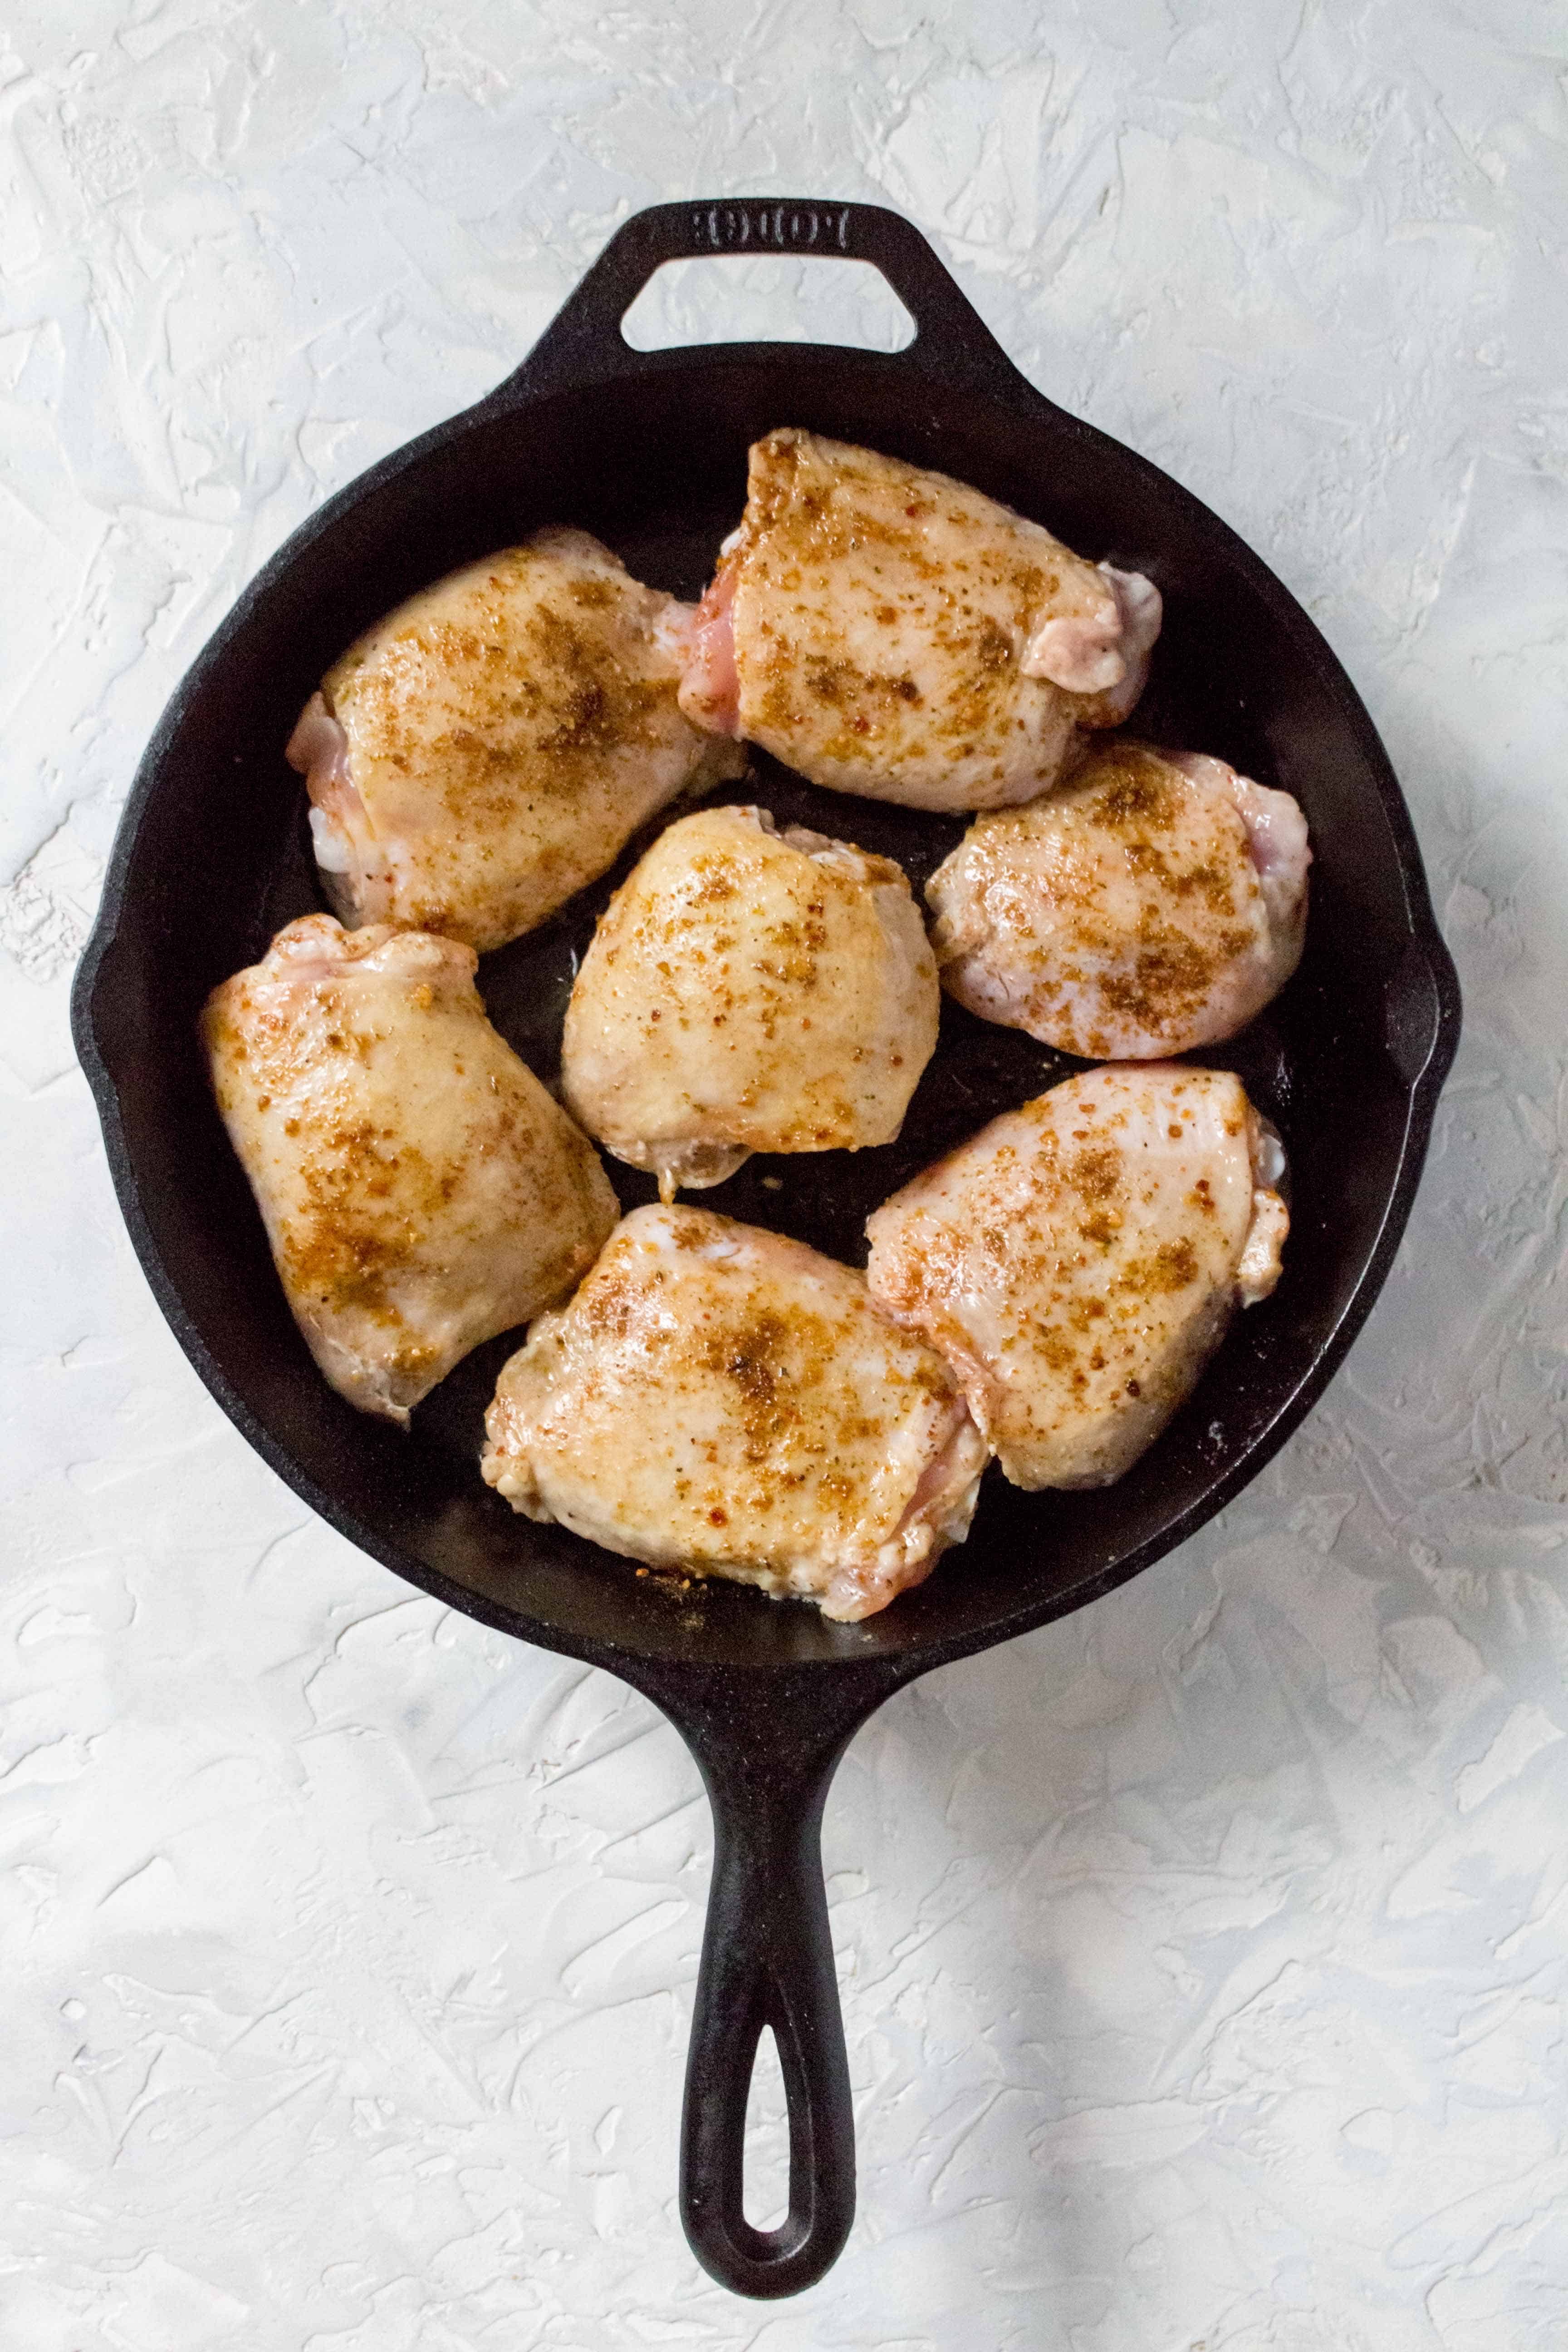 one pot chicken and rice: In a cast iron (or oven safe pan) on medium heat, add in olive oil, and the chicken thighs, skin side down. Cook for 4 minutes before flipping them and letting them cook for another 4 minutes. using tongs, carefully remove the chicken and set aside.